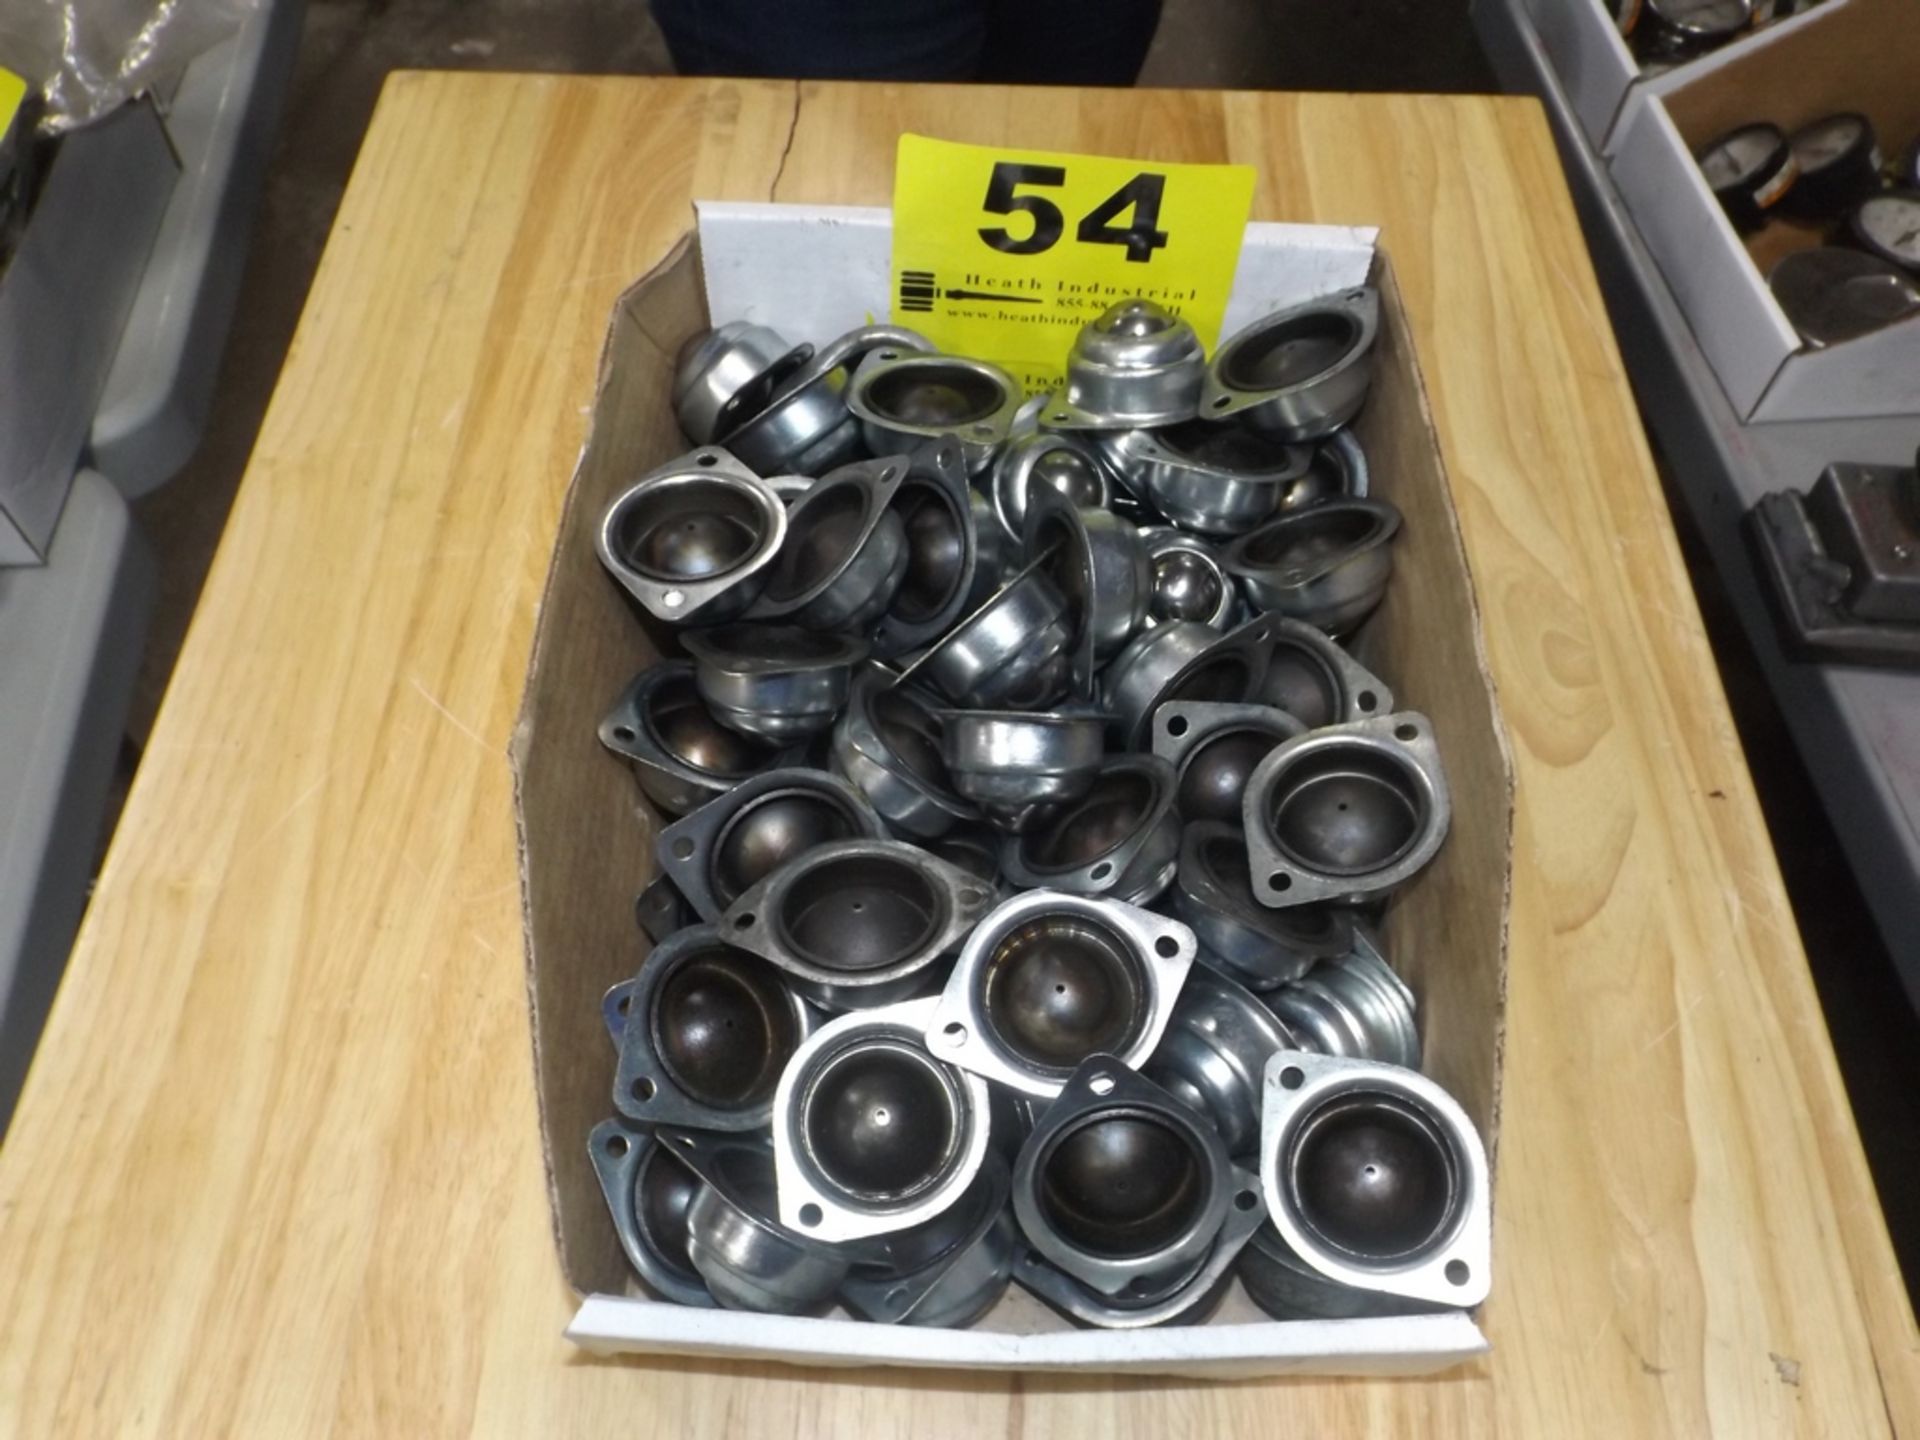 LARGE QUANTITY OF BALL CASTERS IN BOX